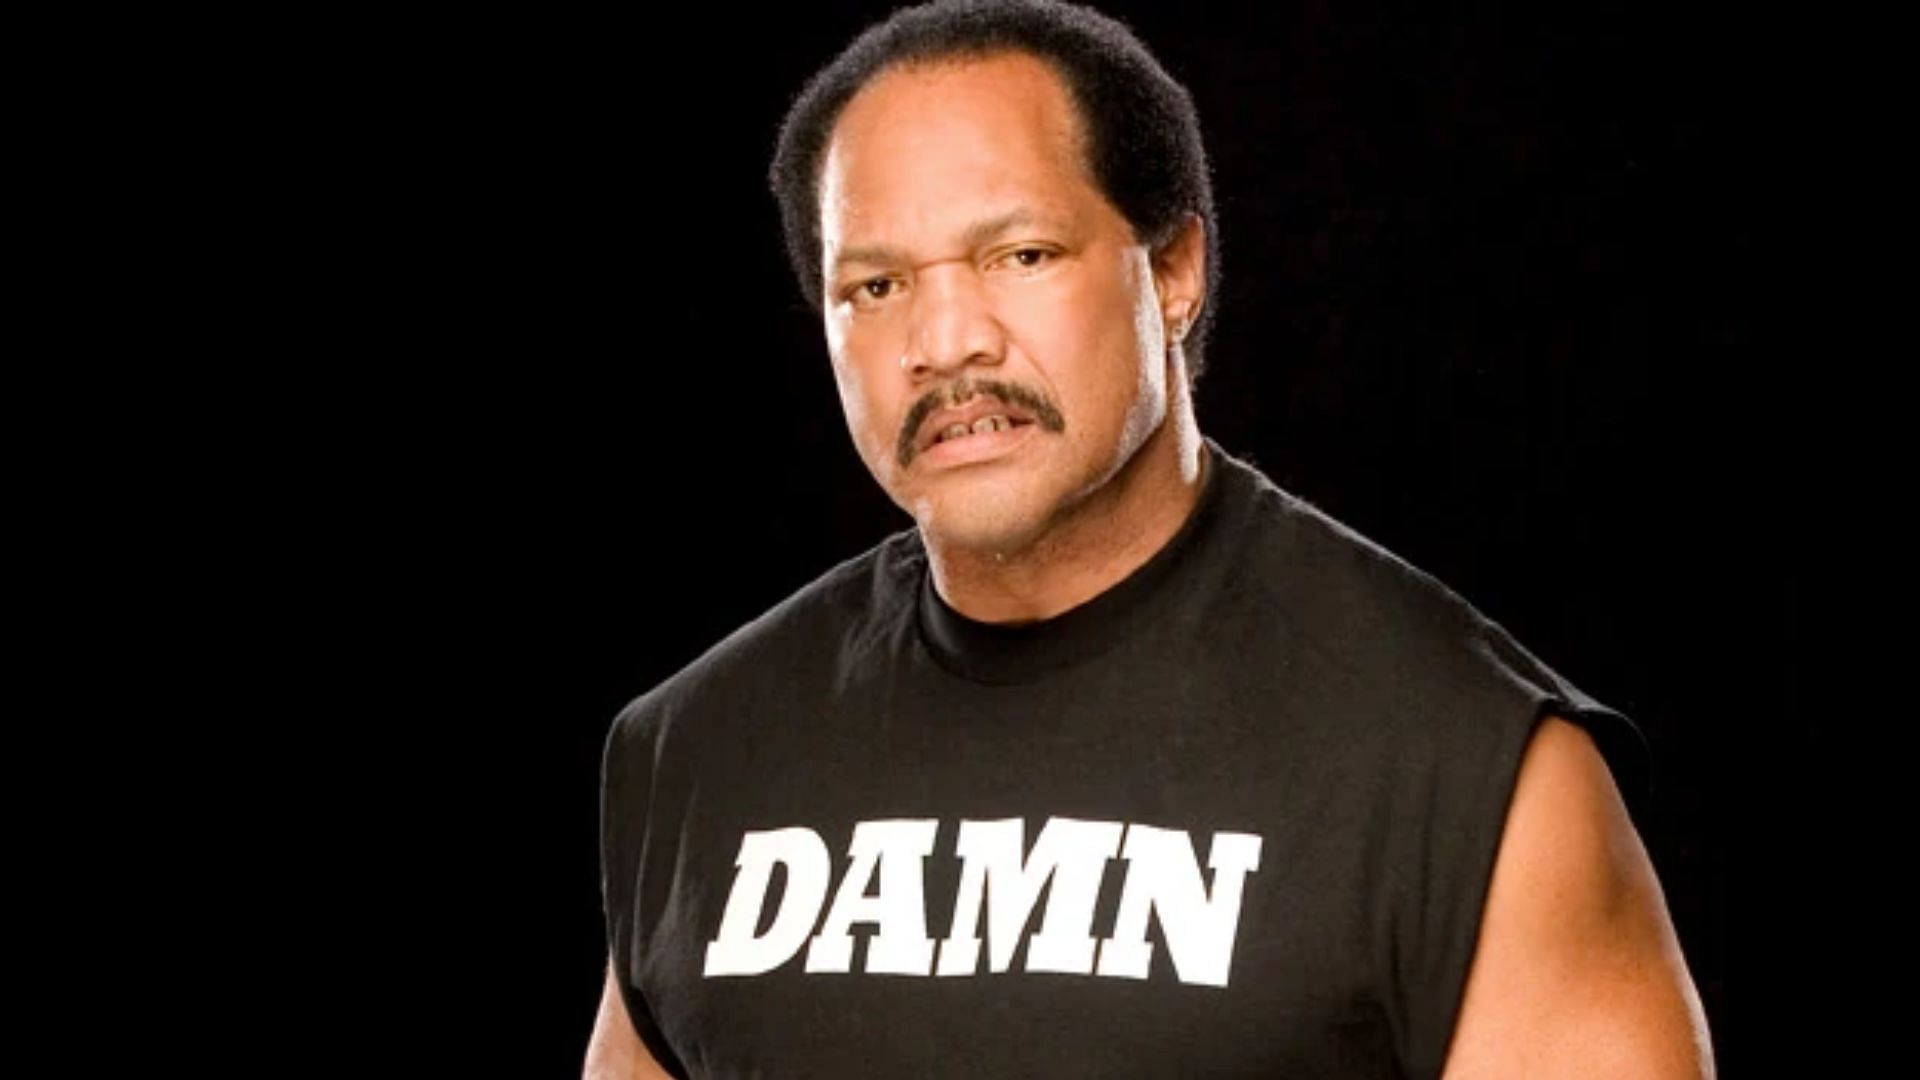 Ron Simmons was inducted into the WWE Hall of Fame in 2012